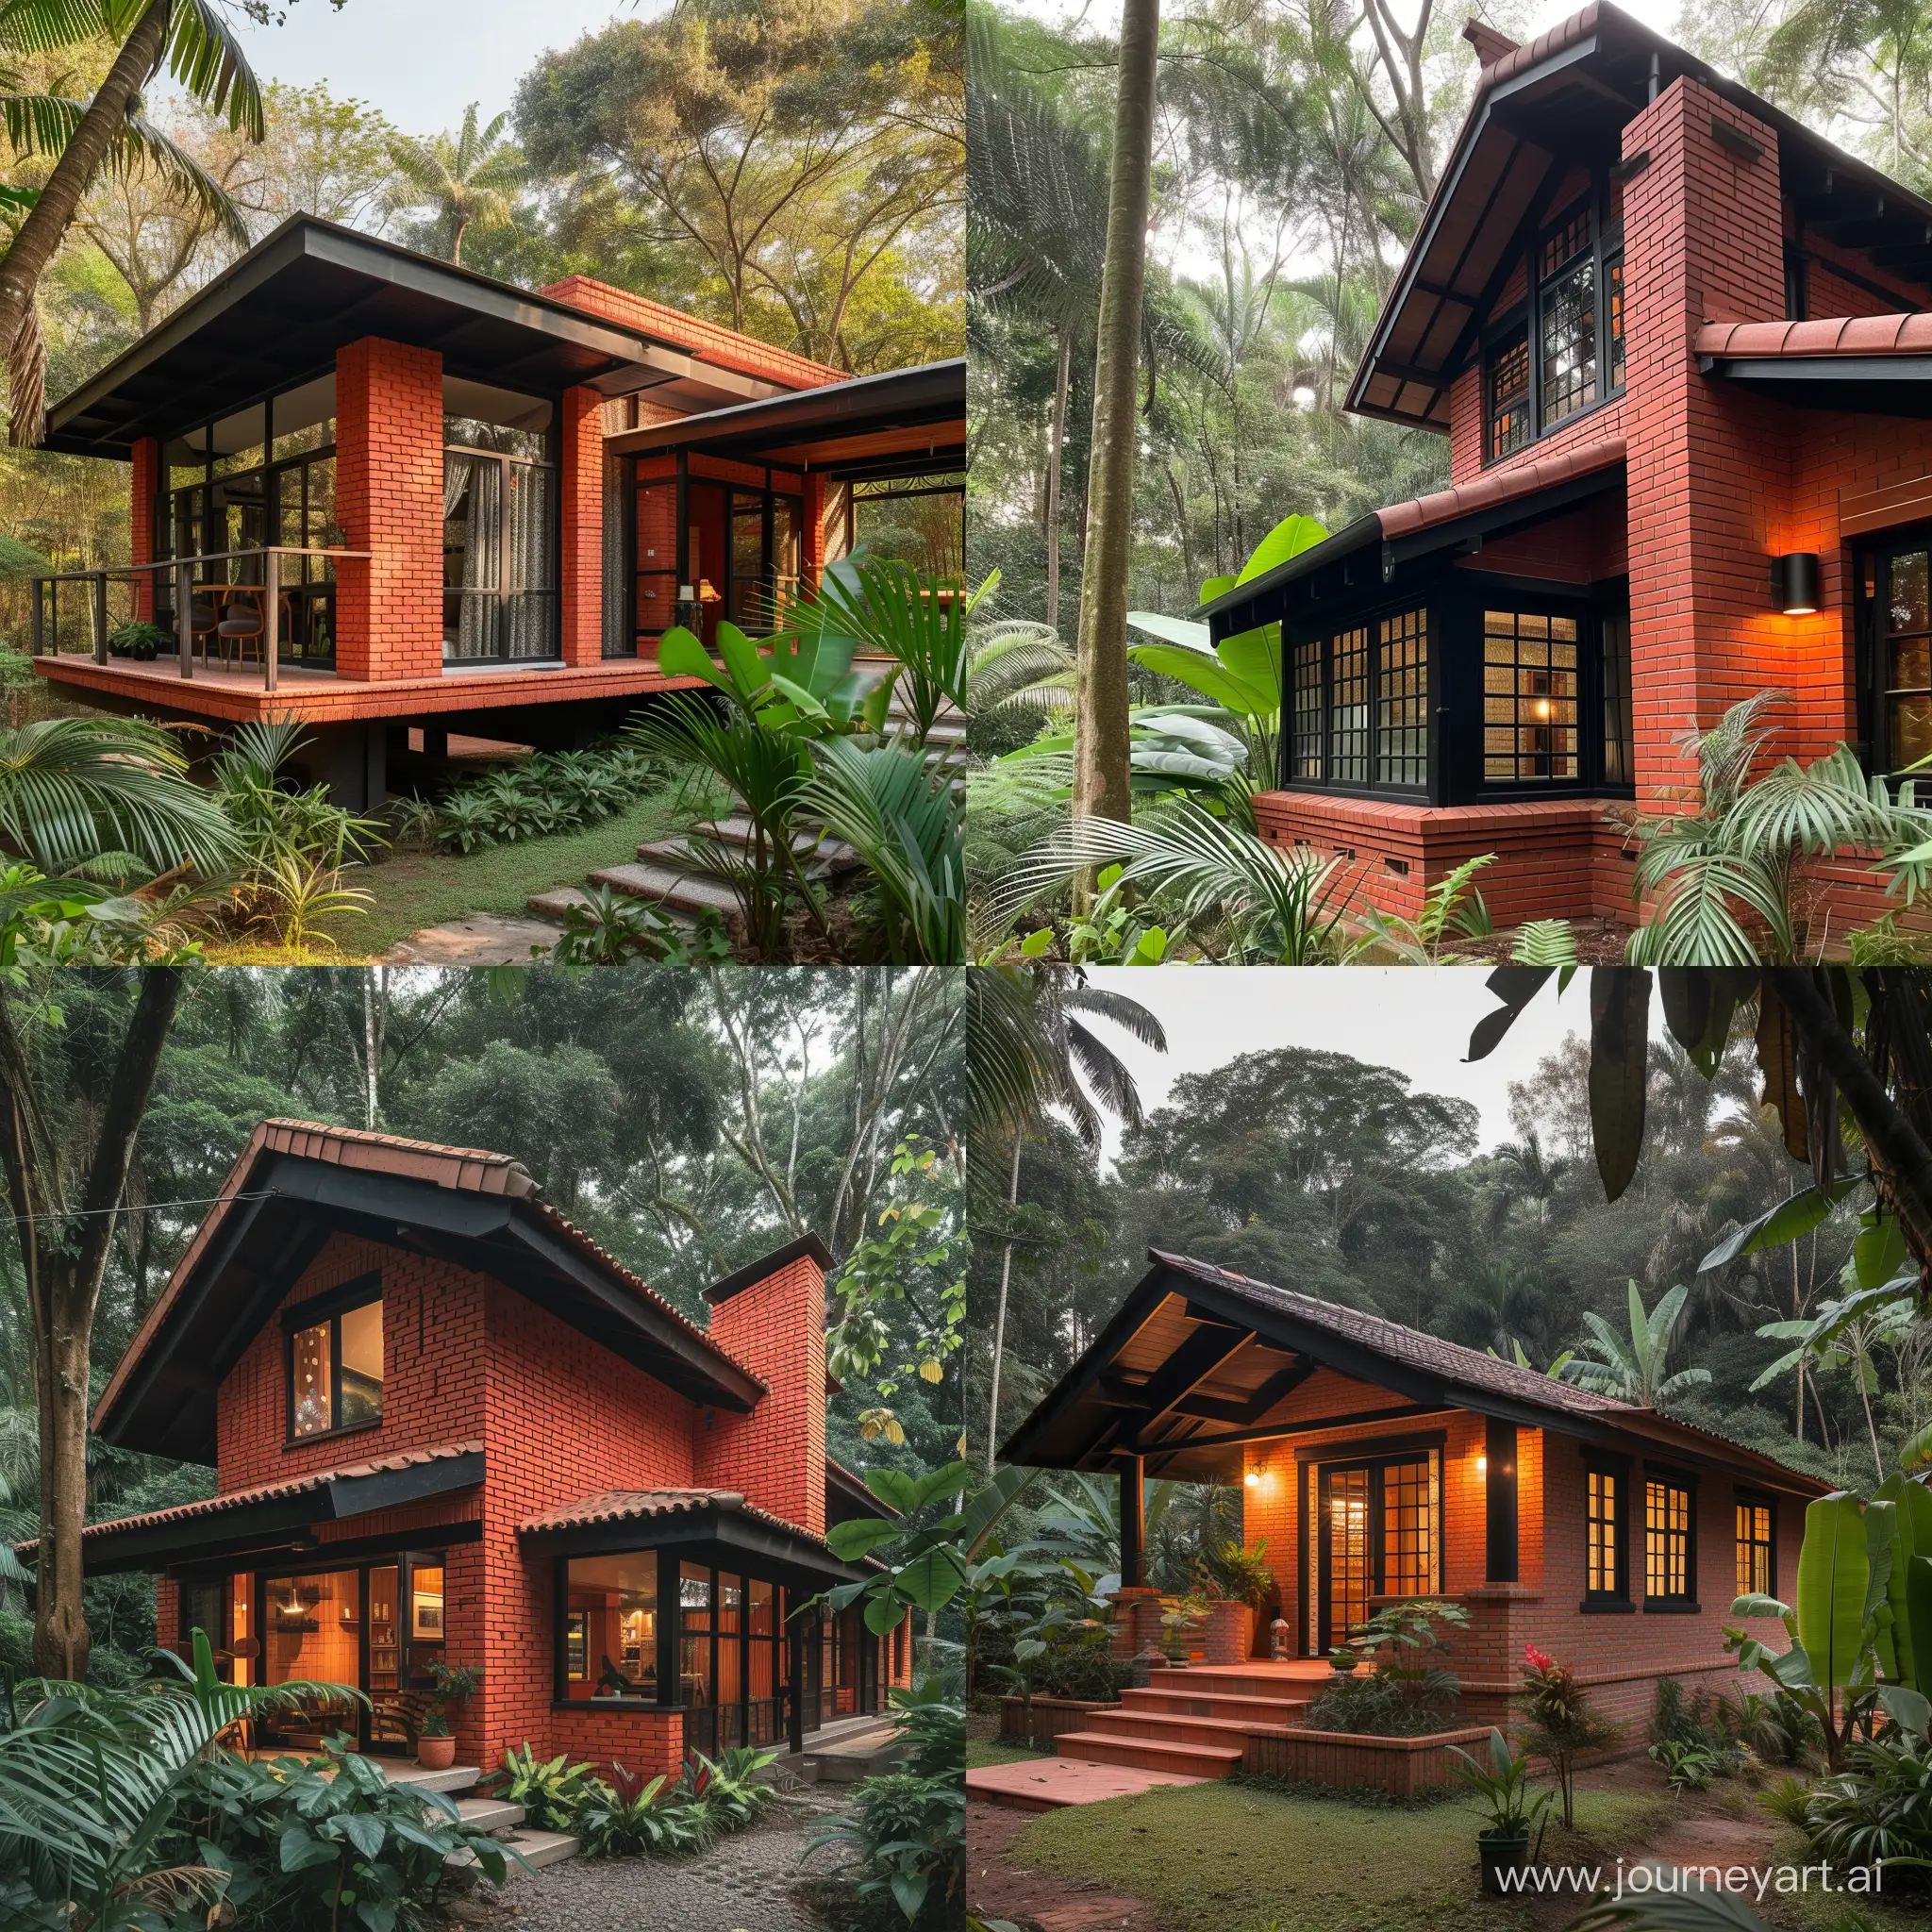 Cozy-Red-Brick-Bungalow-Arts-and-Crafts-Fusion-in-Rainforest-Setting